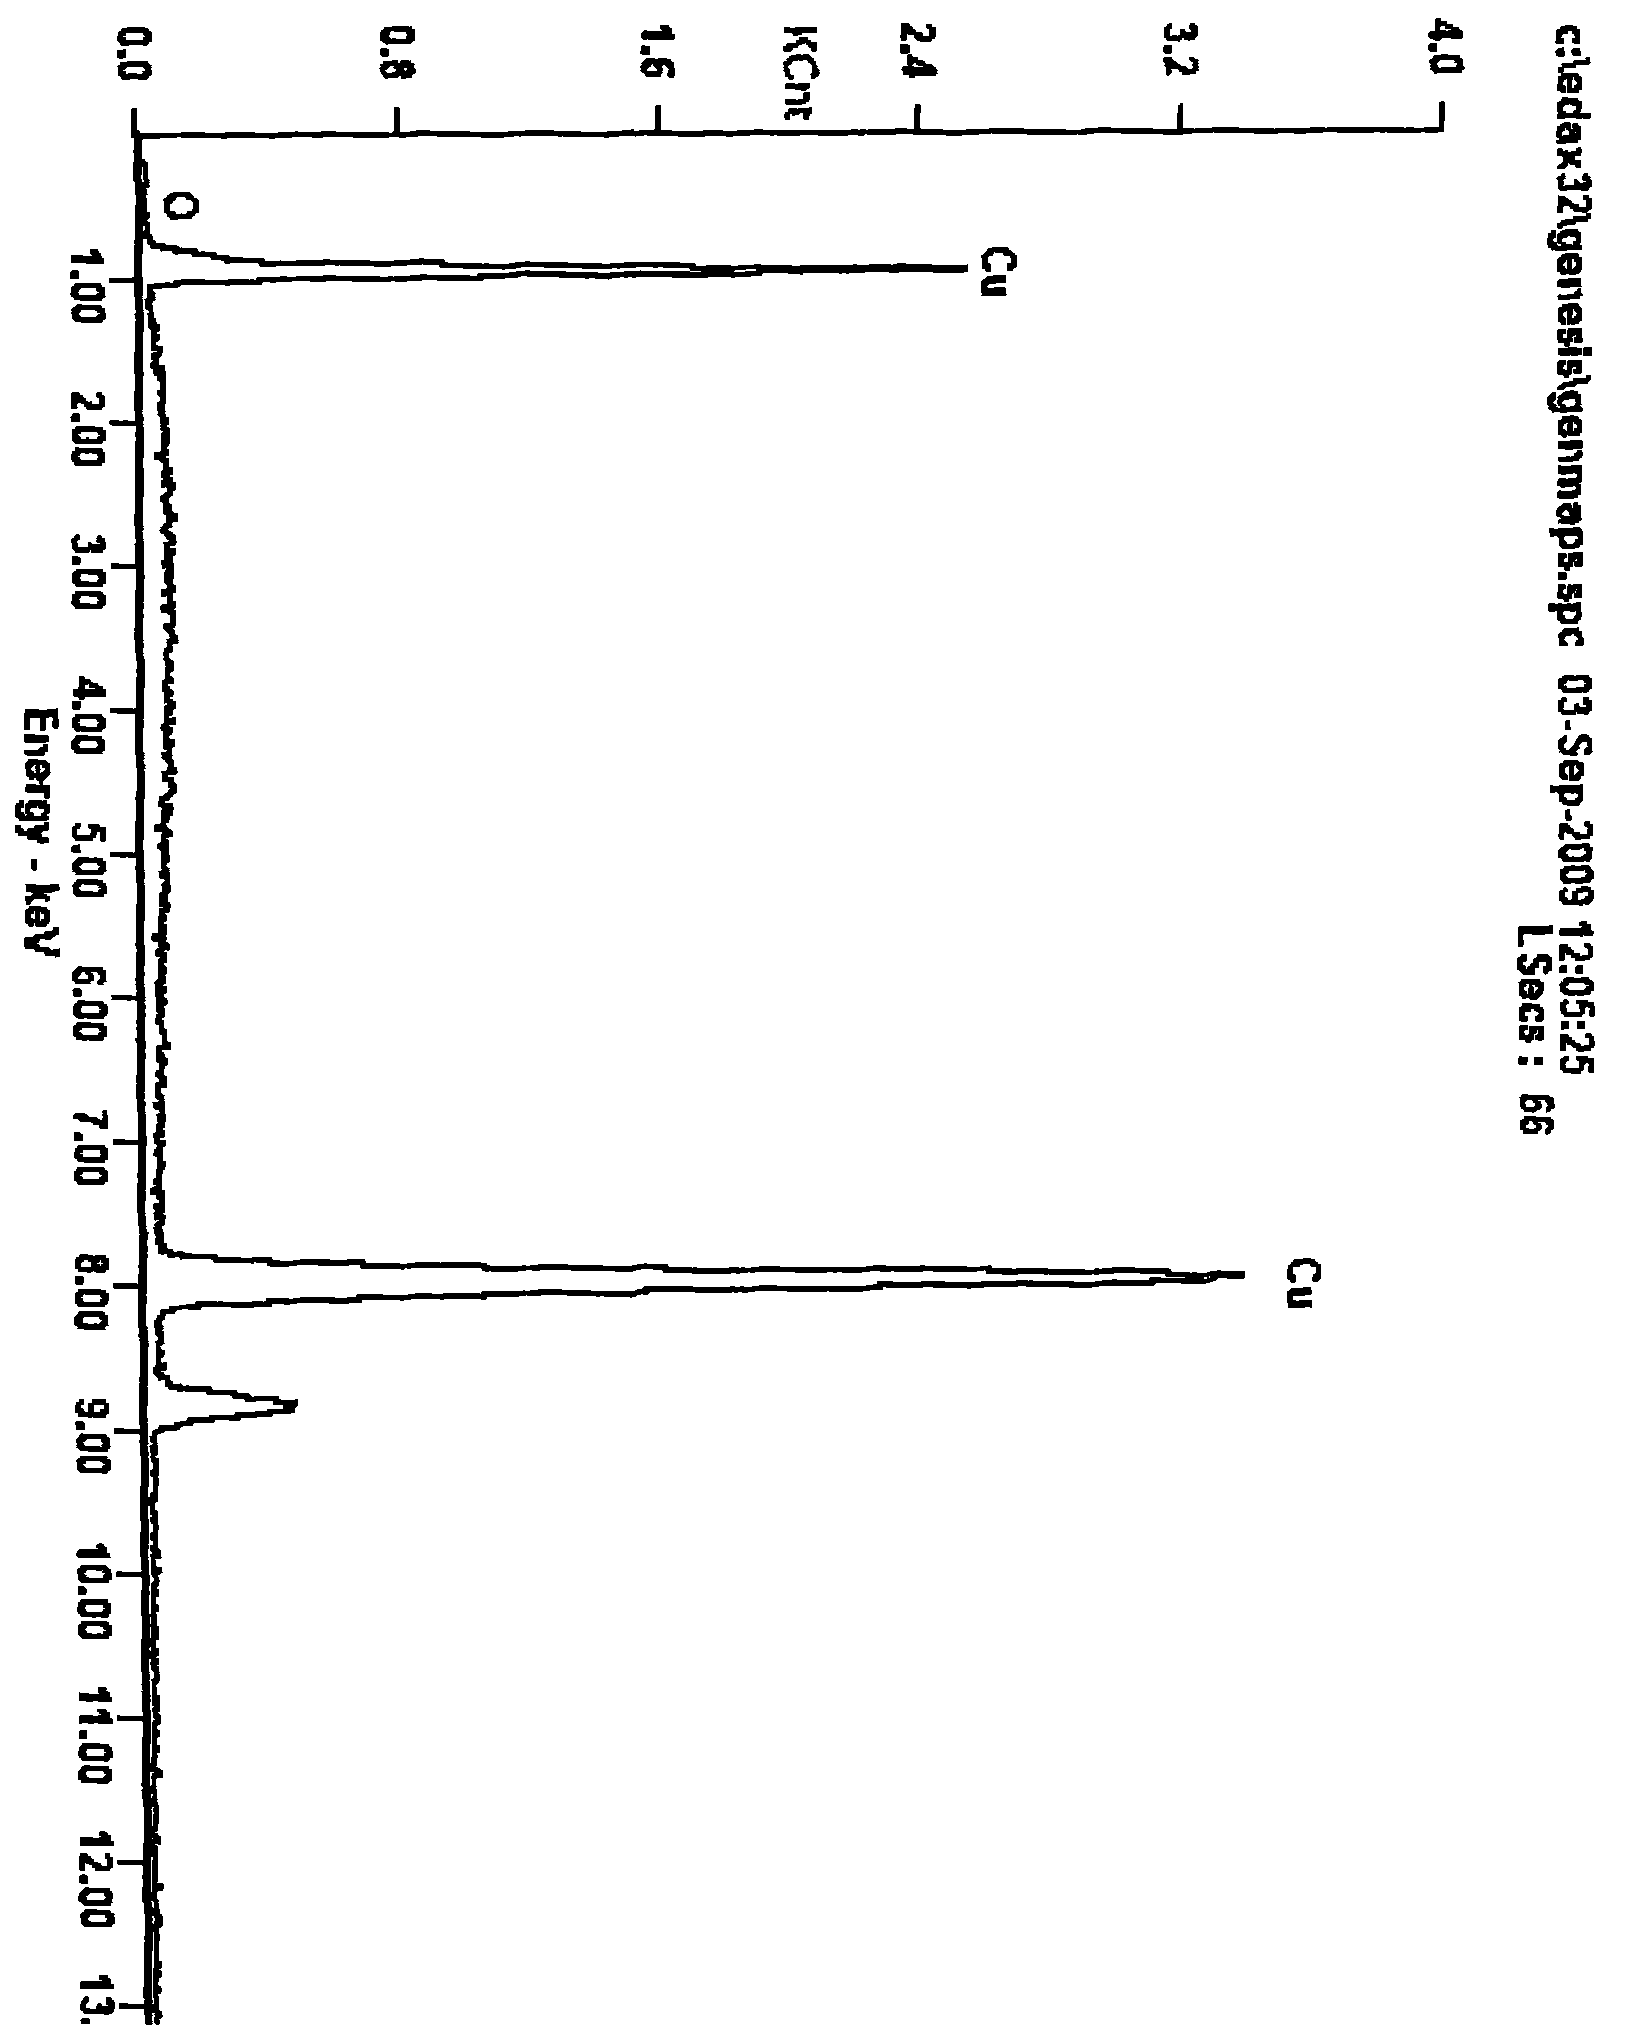 Submicron copper powder and method for preparing same by sulfuric acid-process chemical reduction